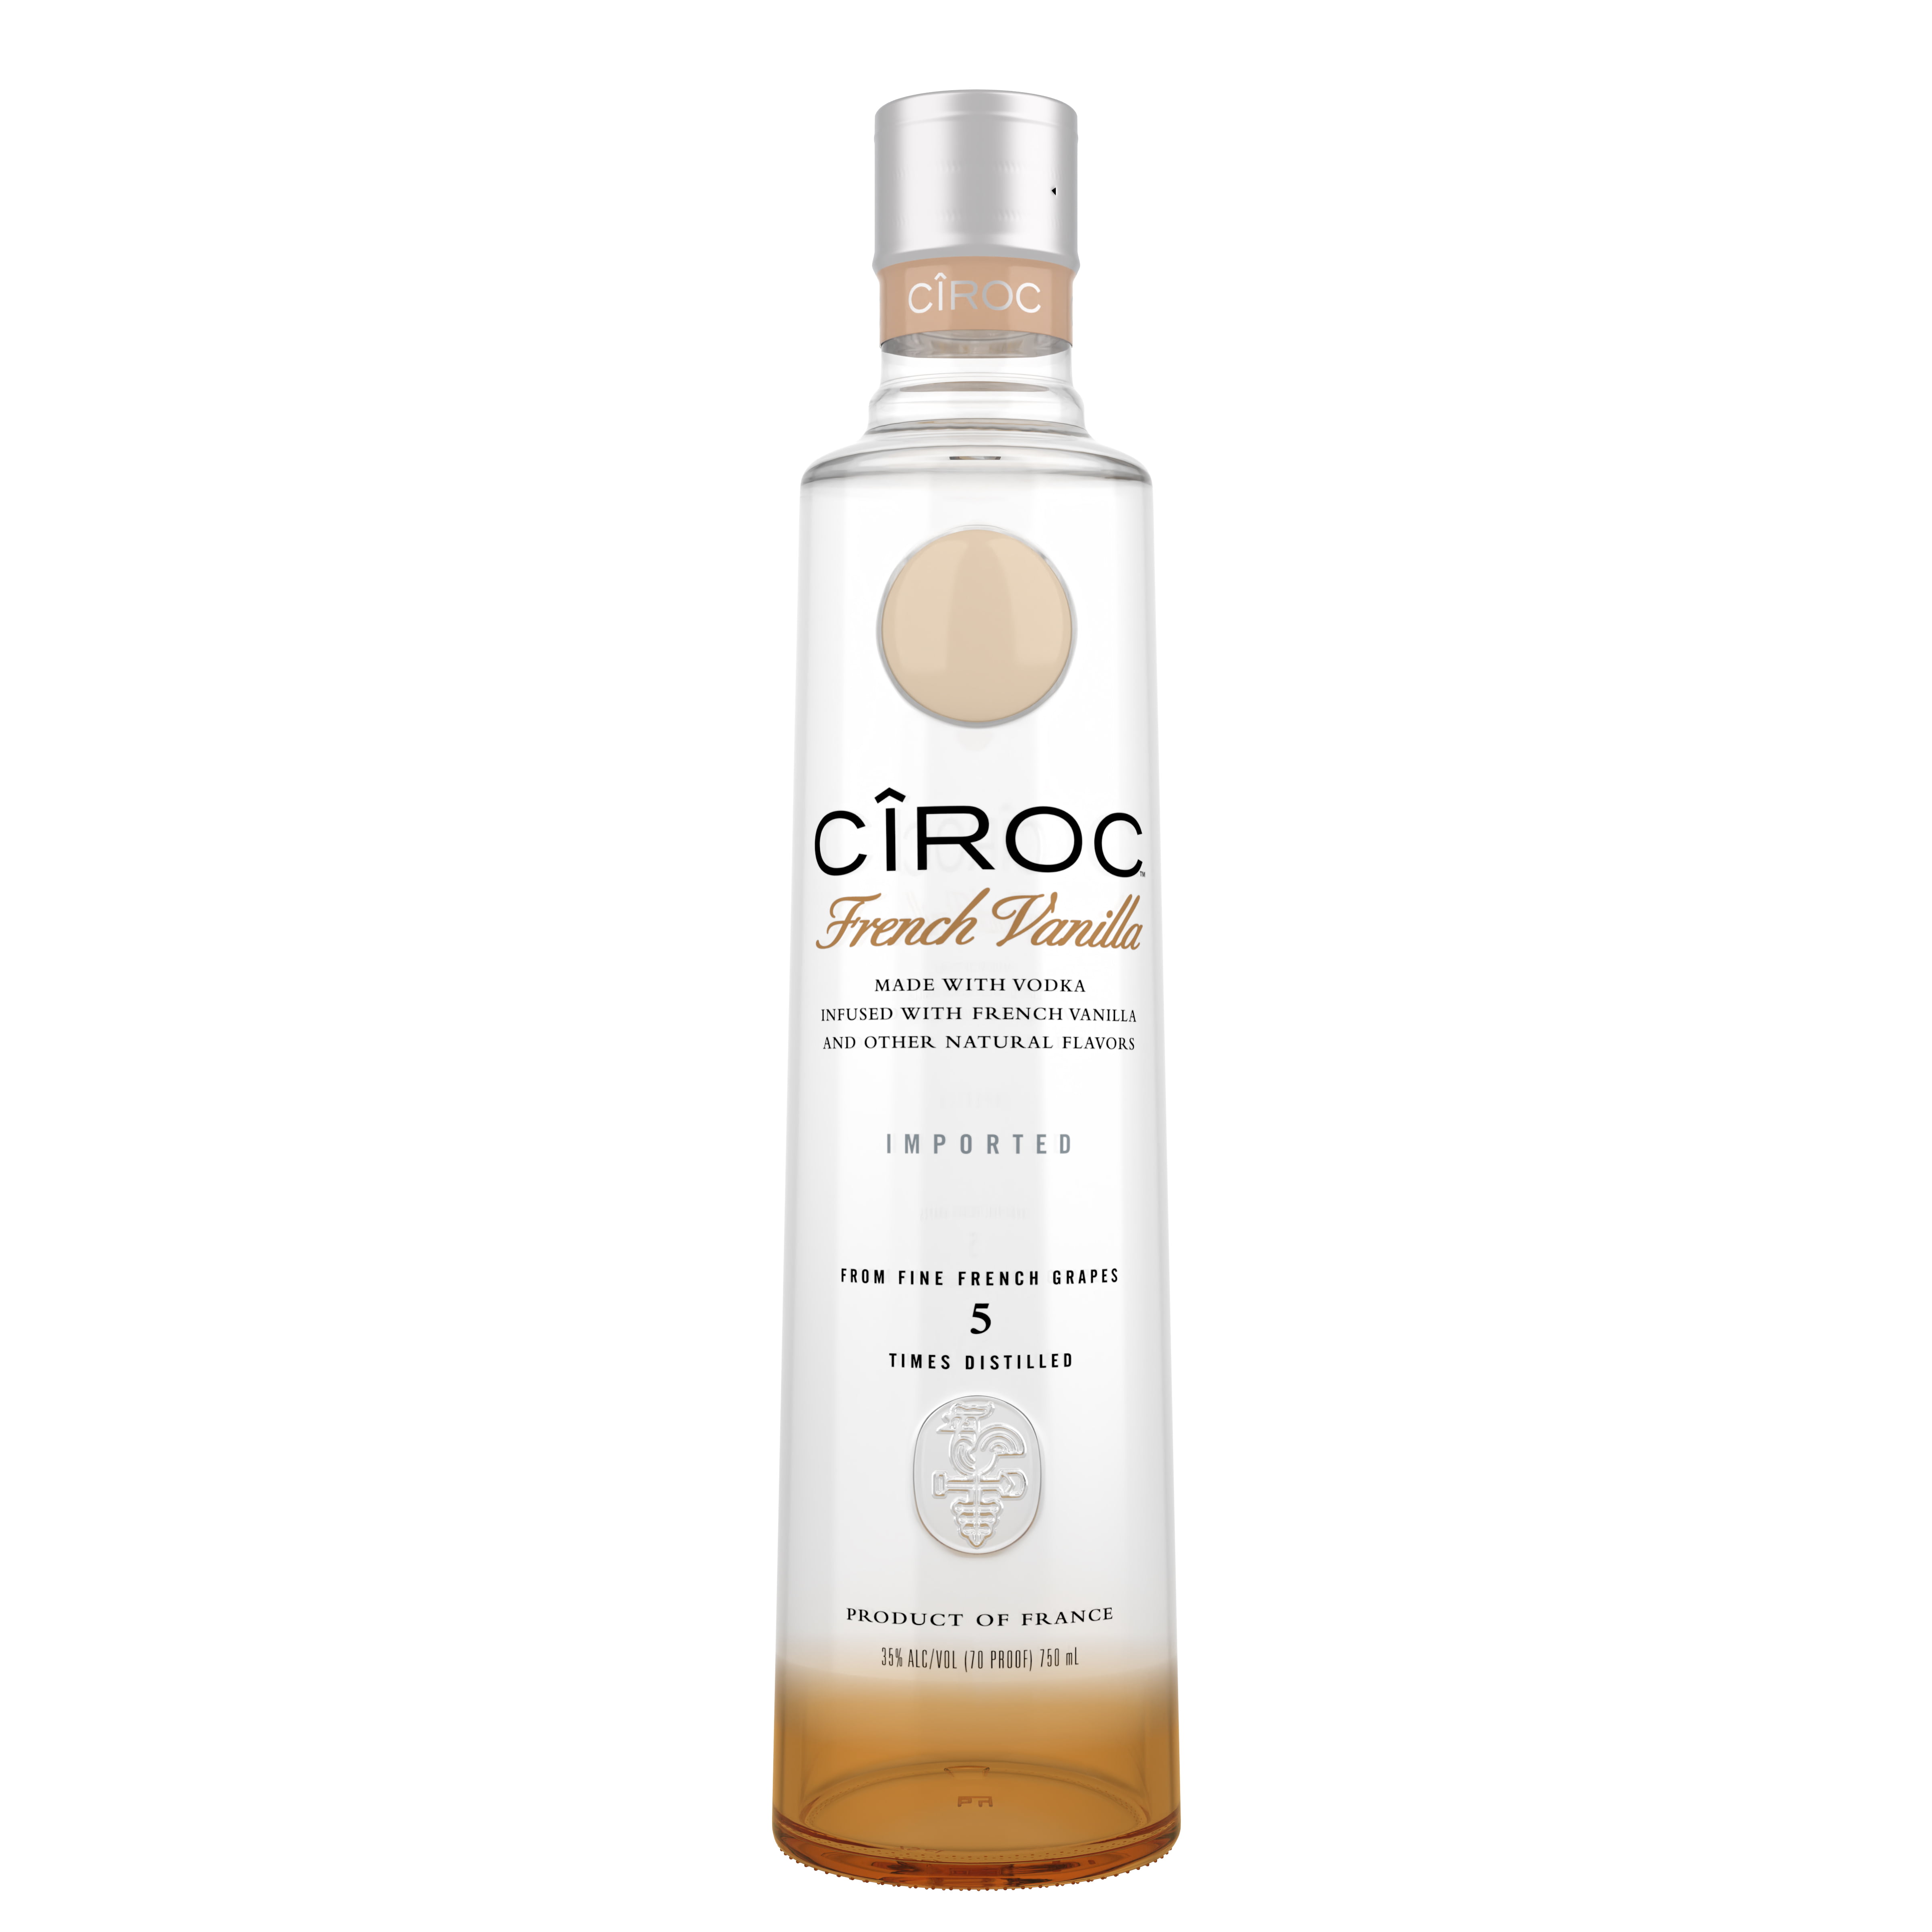 CIROC French Vanilla, 750 mL, 70 Proof (Made with Vodka Infused with ...